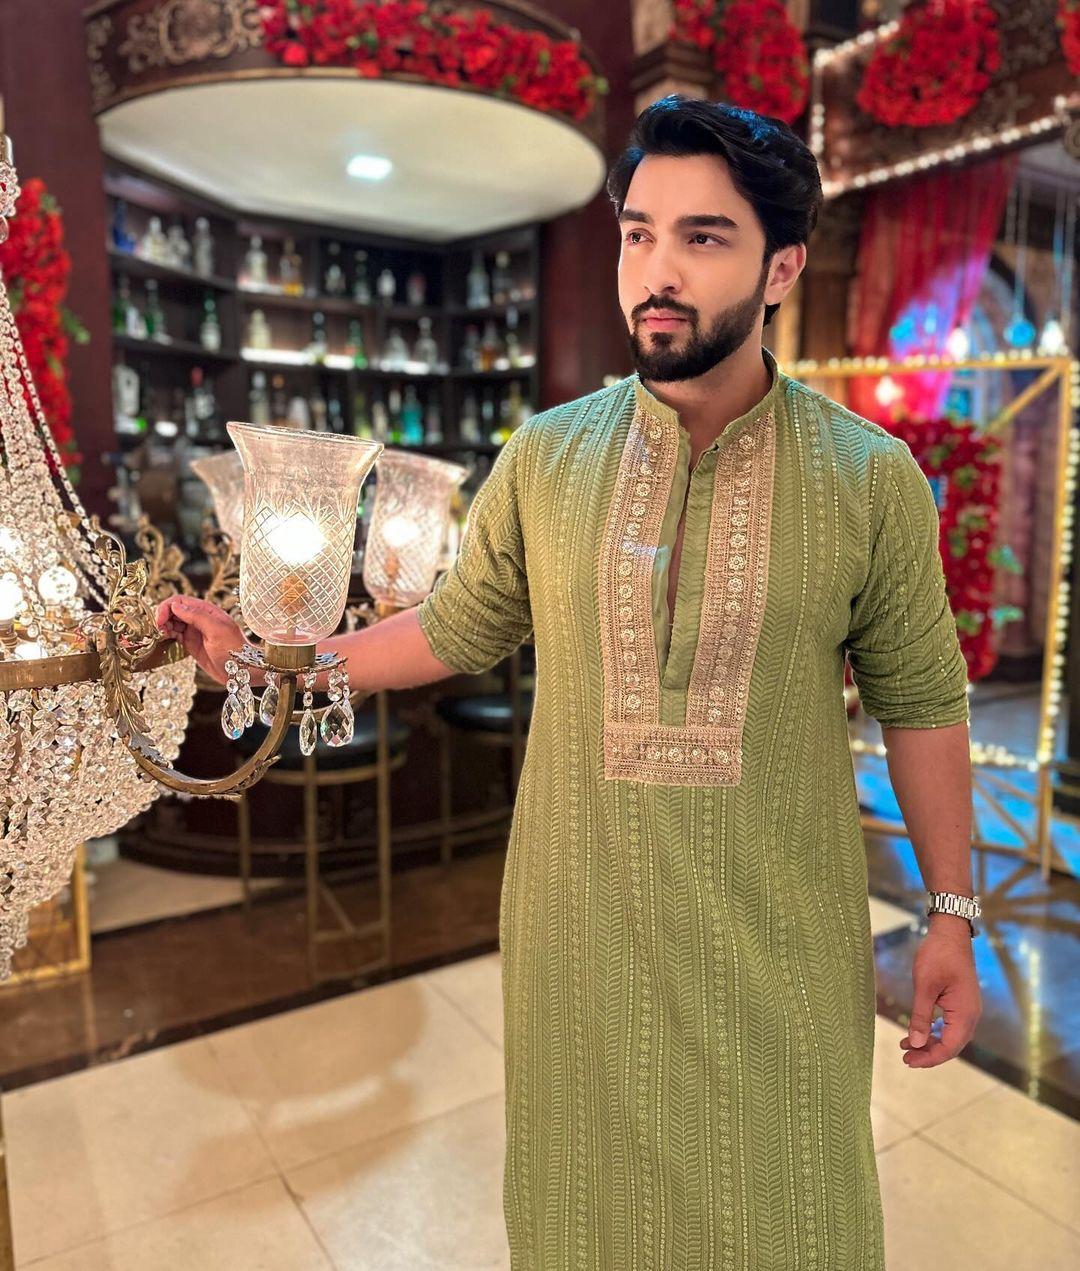  If you're looking to style something simple yet elegant, then this kurta is perfect for you